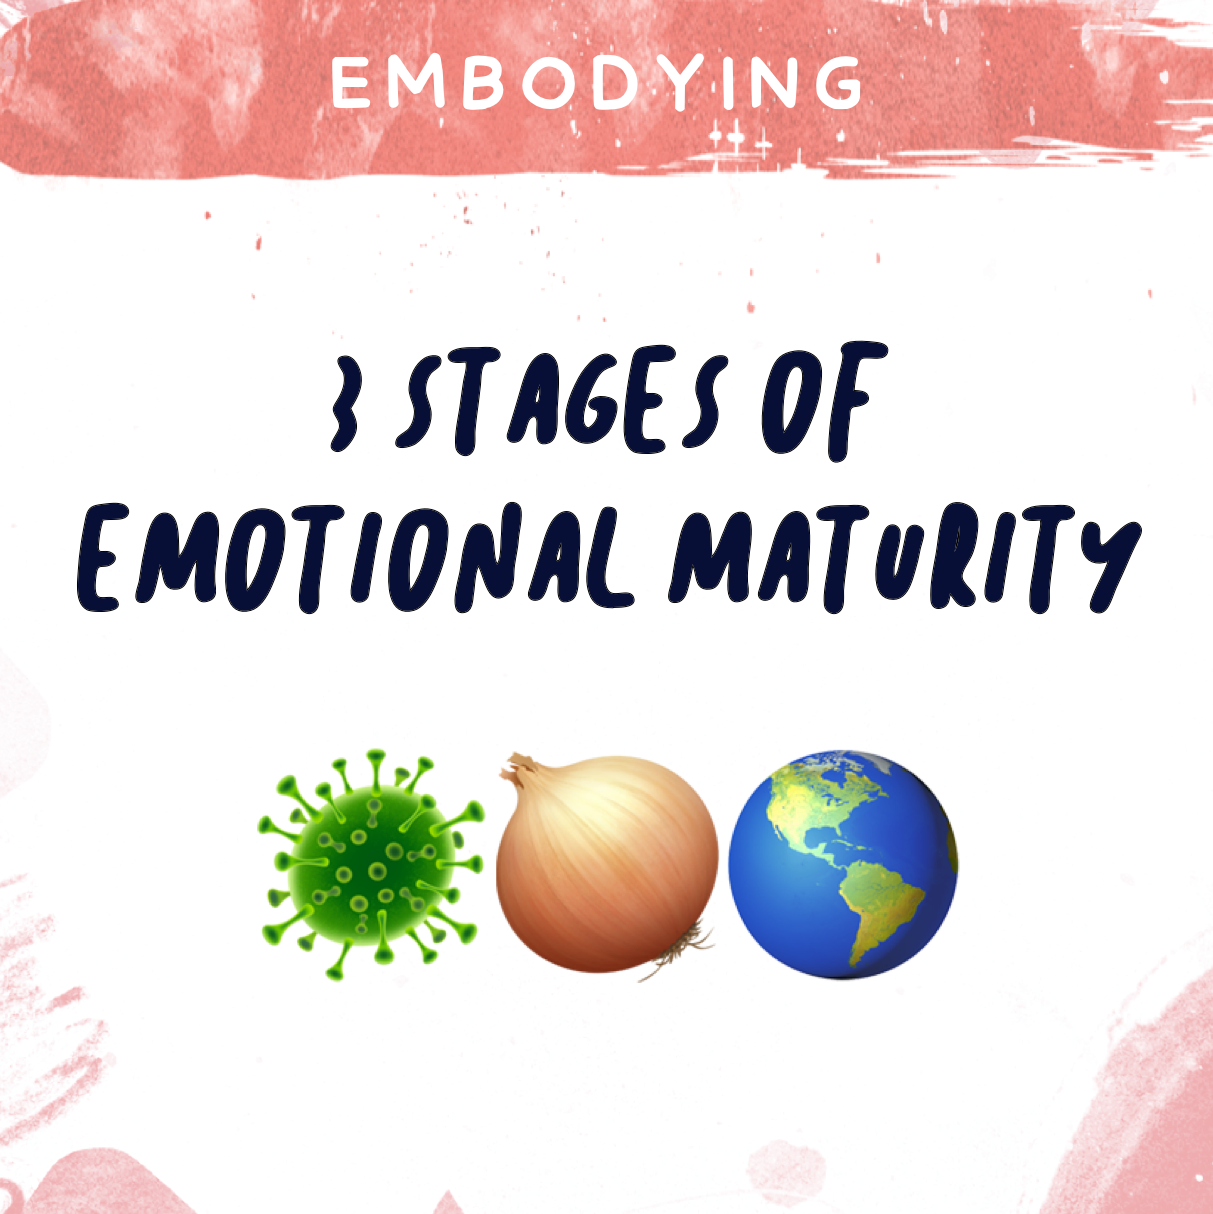 The 3 Stages of Emotional Maturity